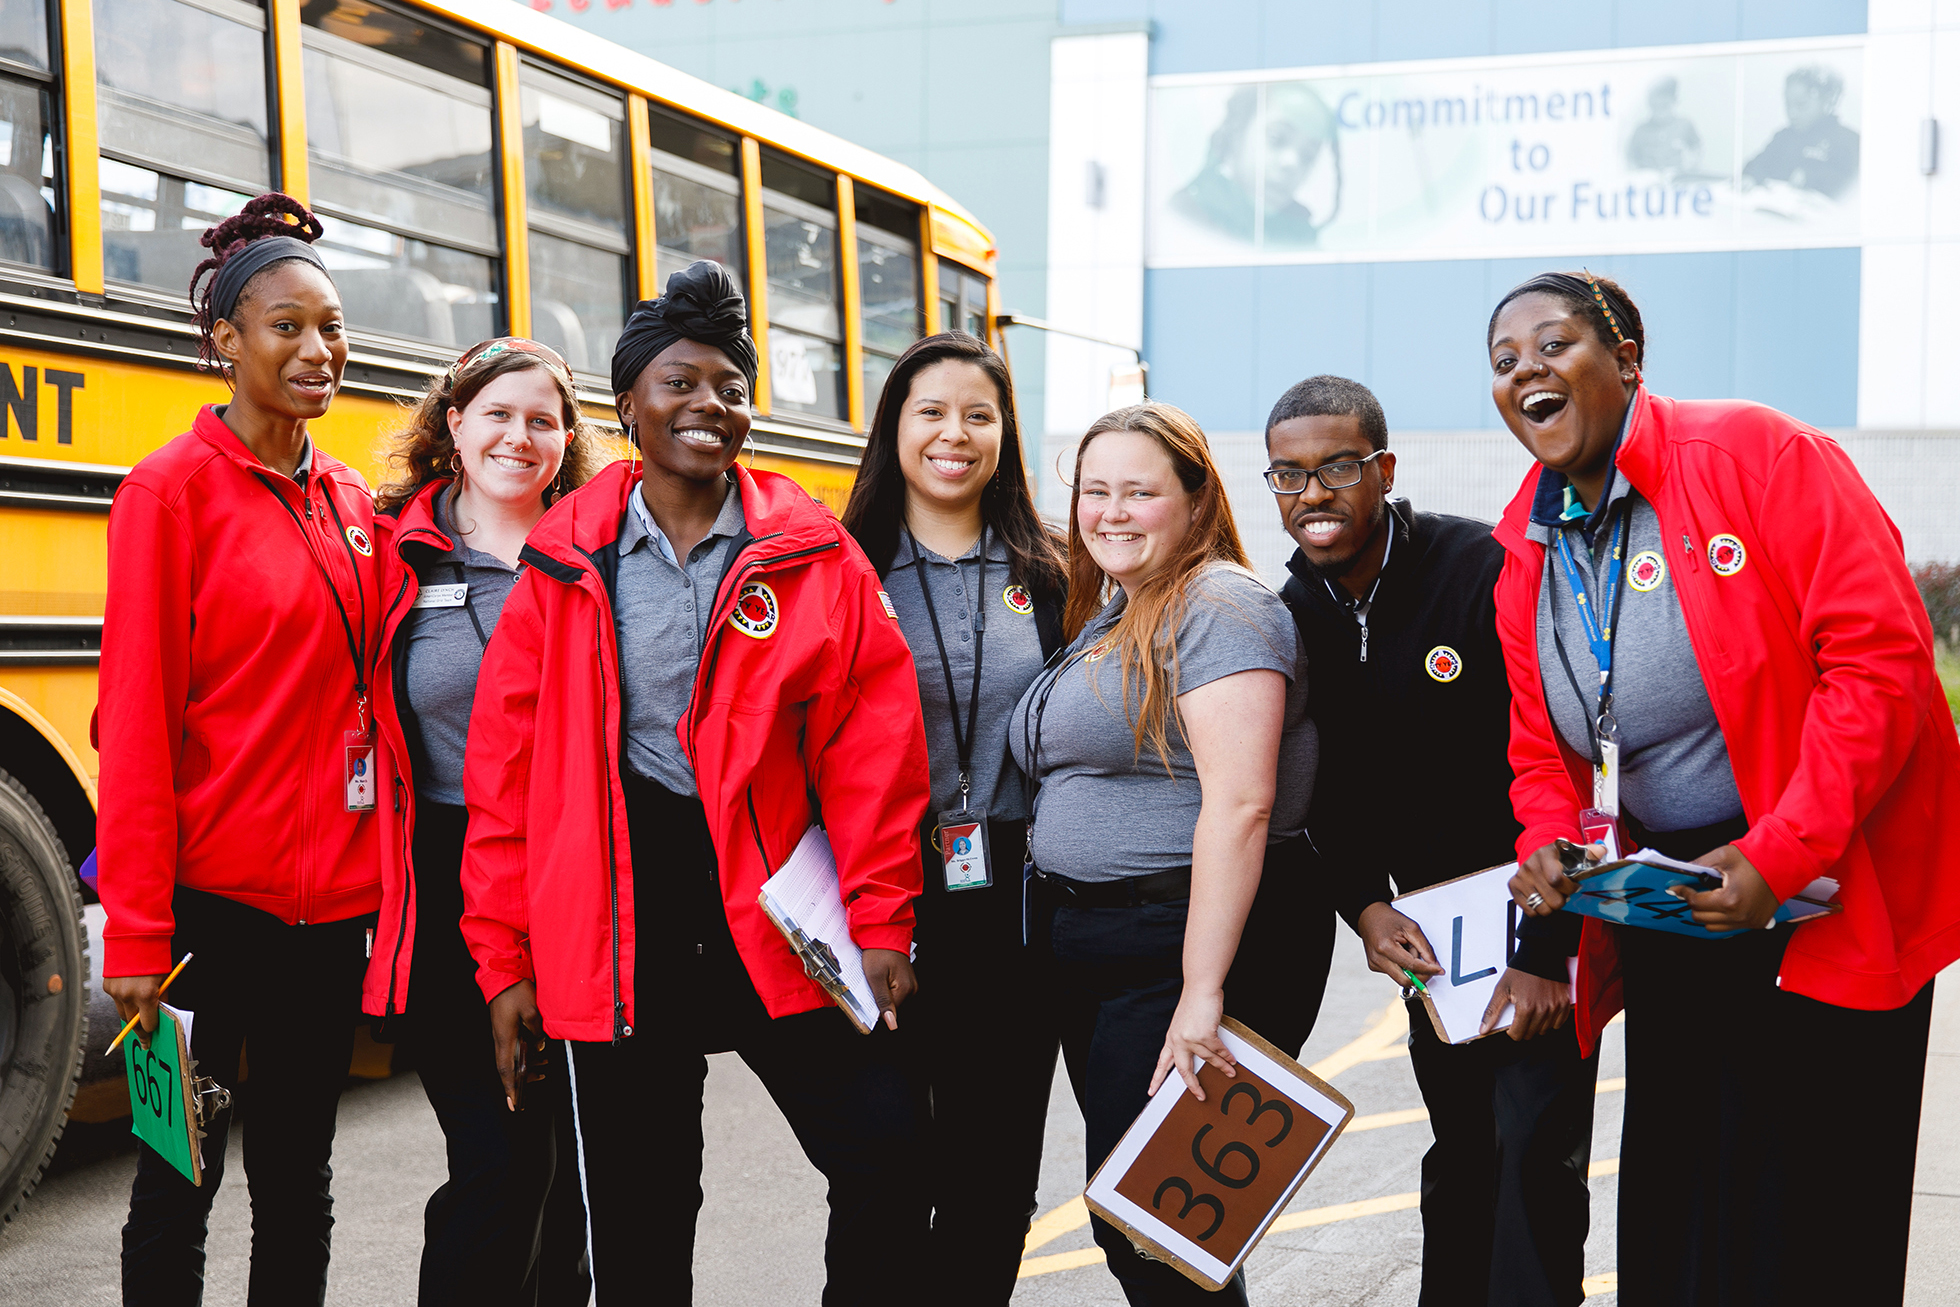 City Year's Americorps volunteers smiling in front of a school bus